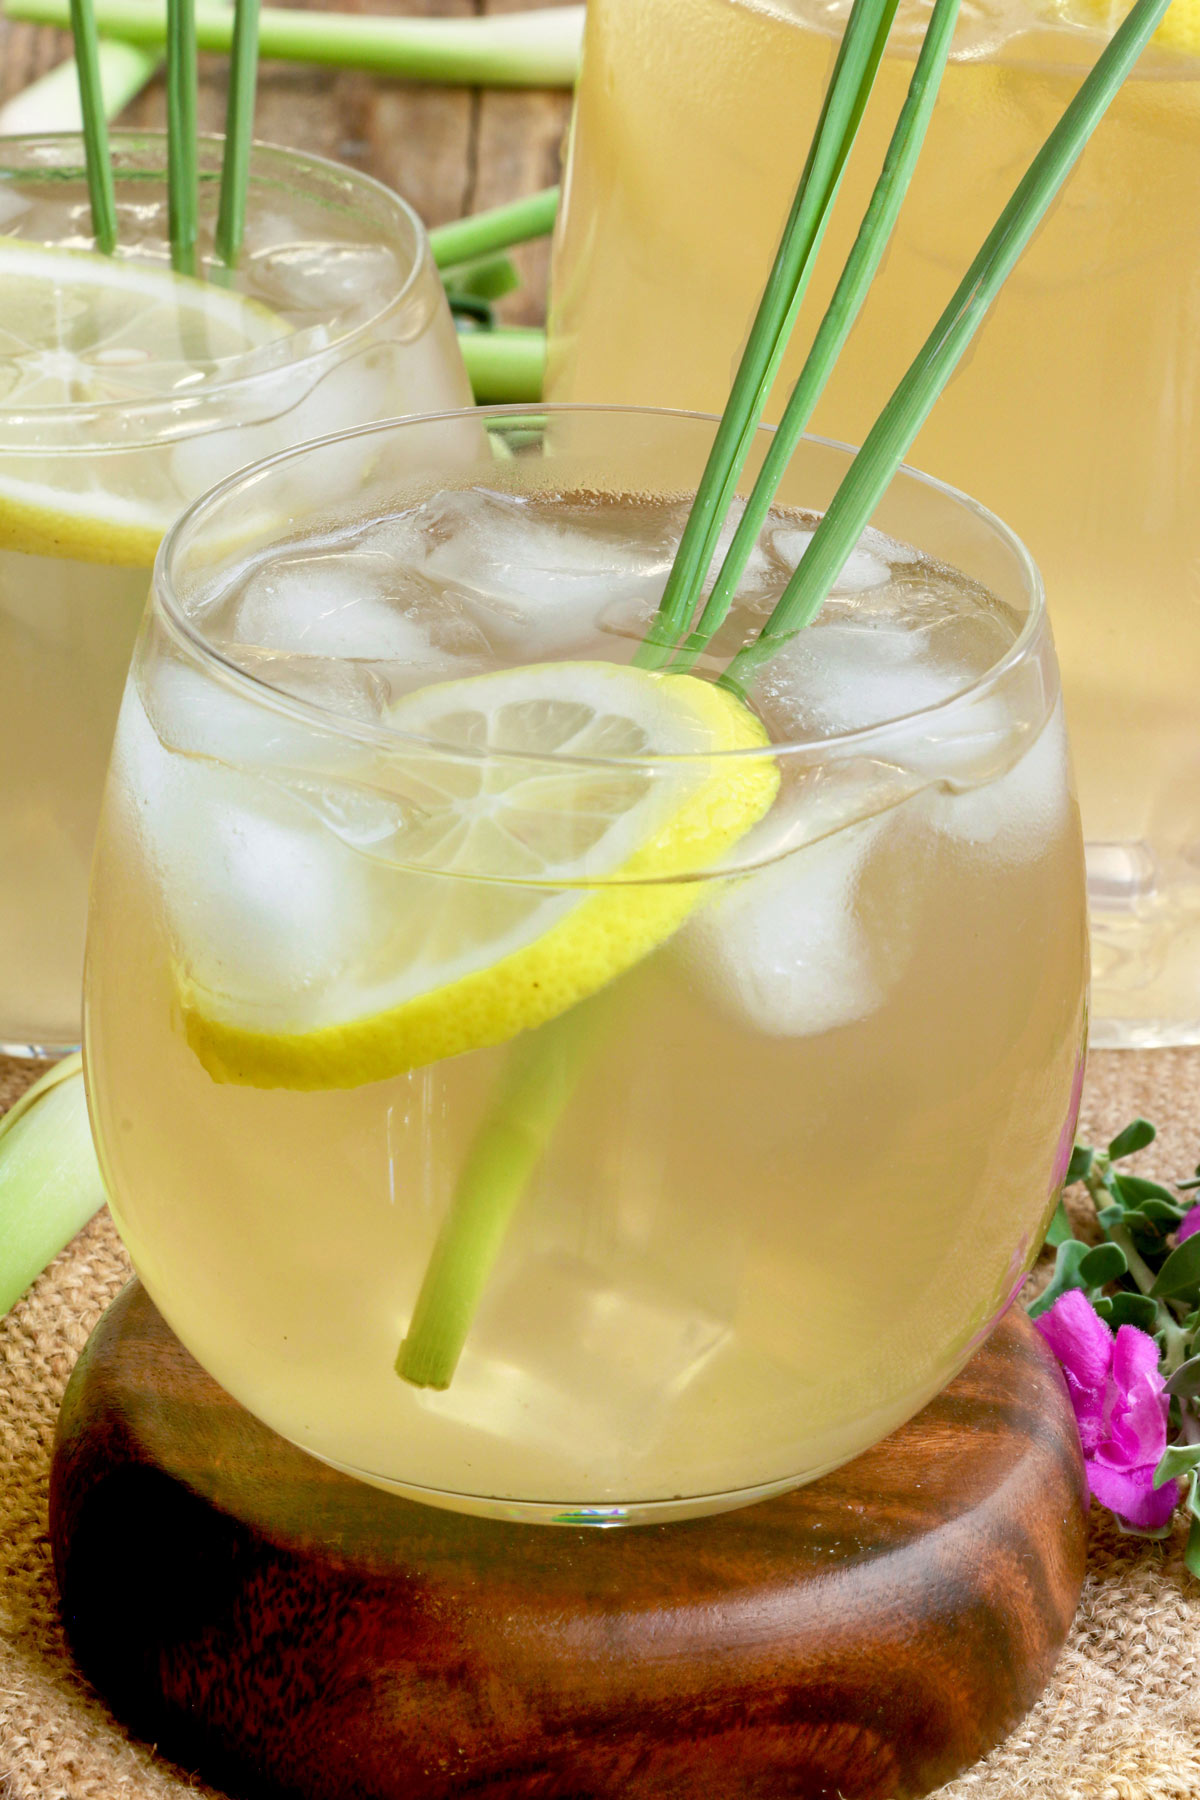 Lemongrass juice served in glasses over ice with slices of lemon and lemongrass.